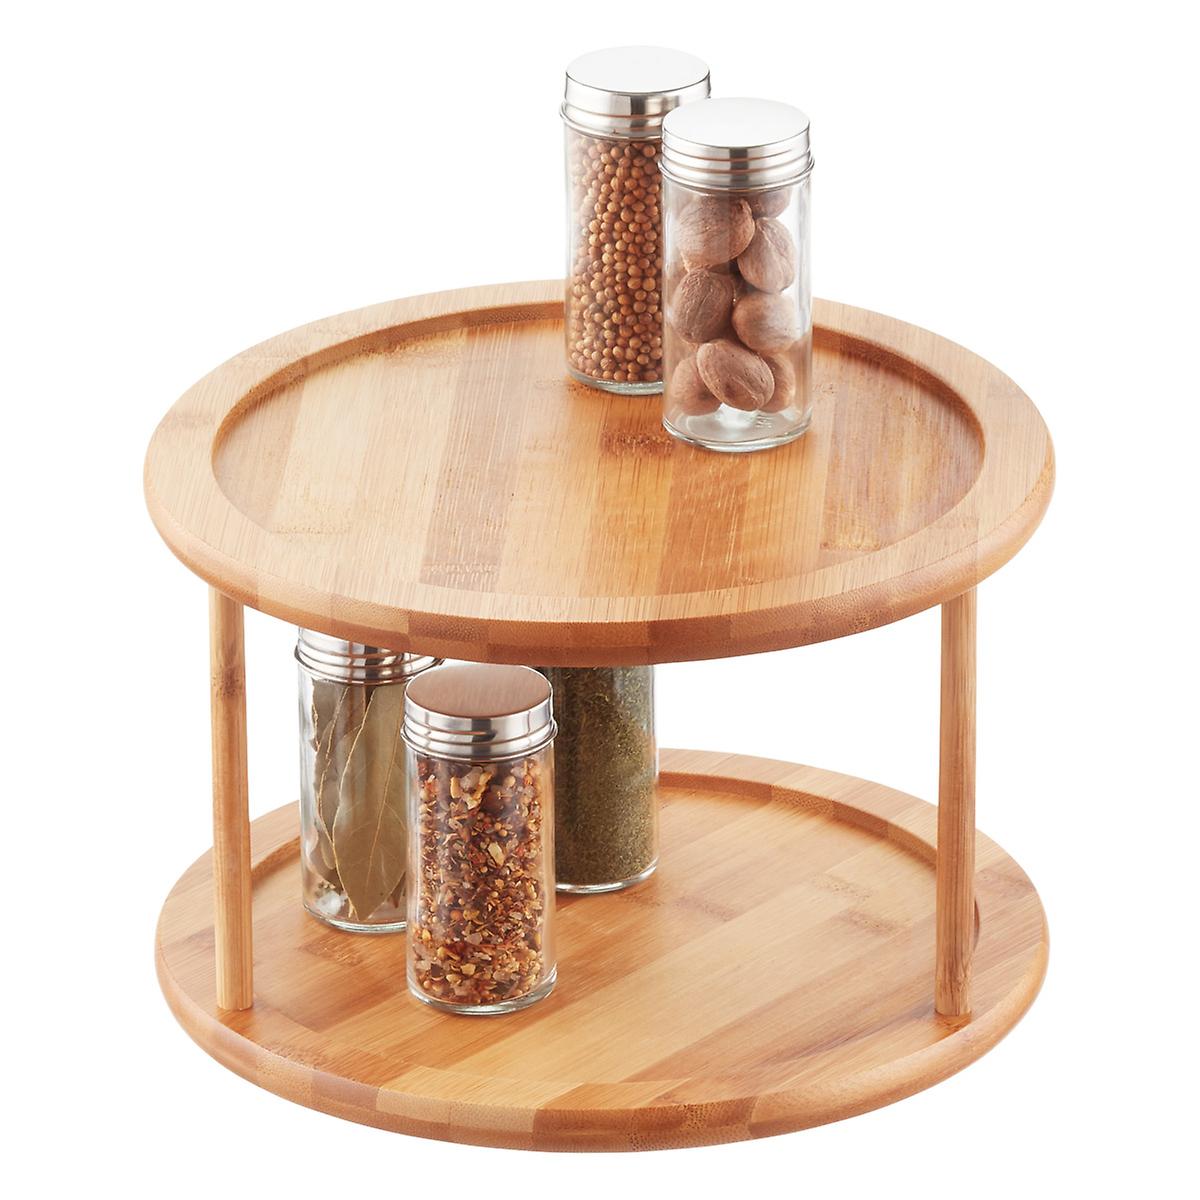 2 Tier Bamboo Lazy Susan The Container Store